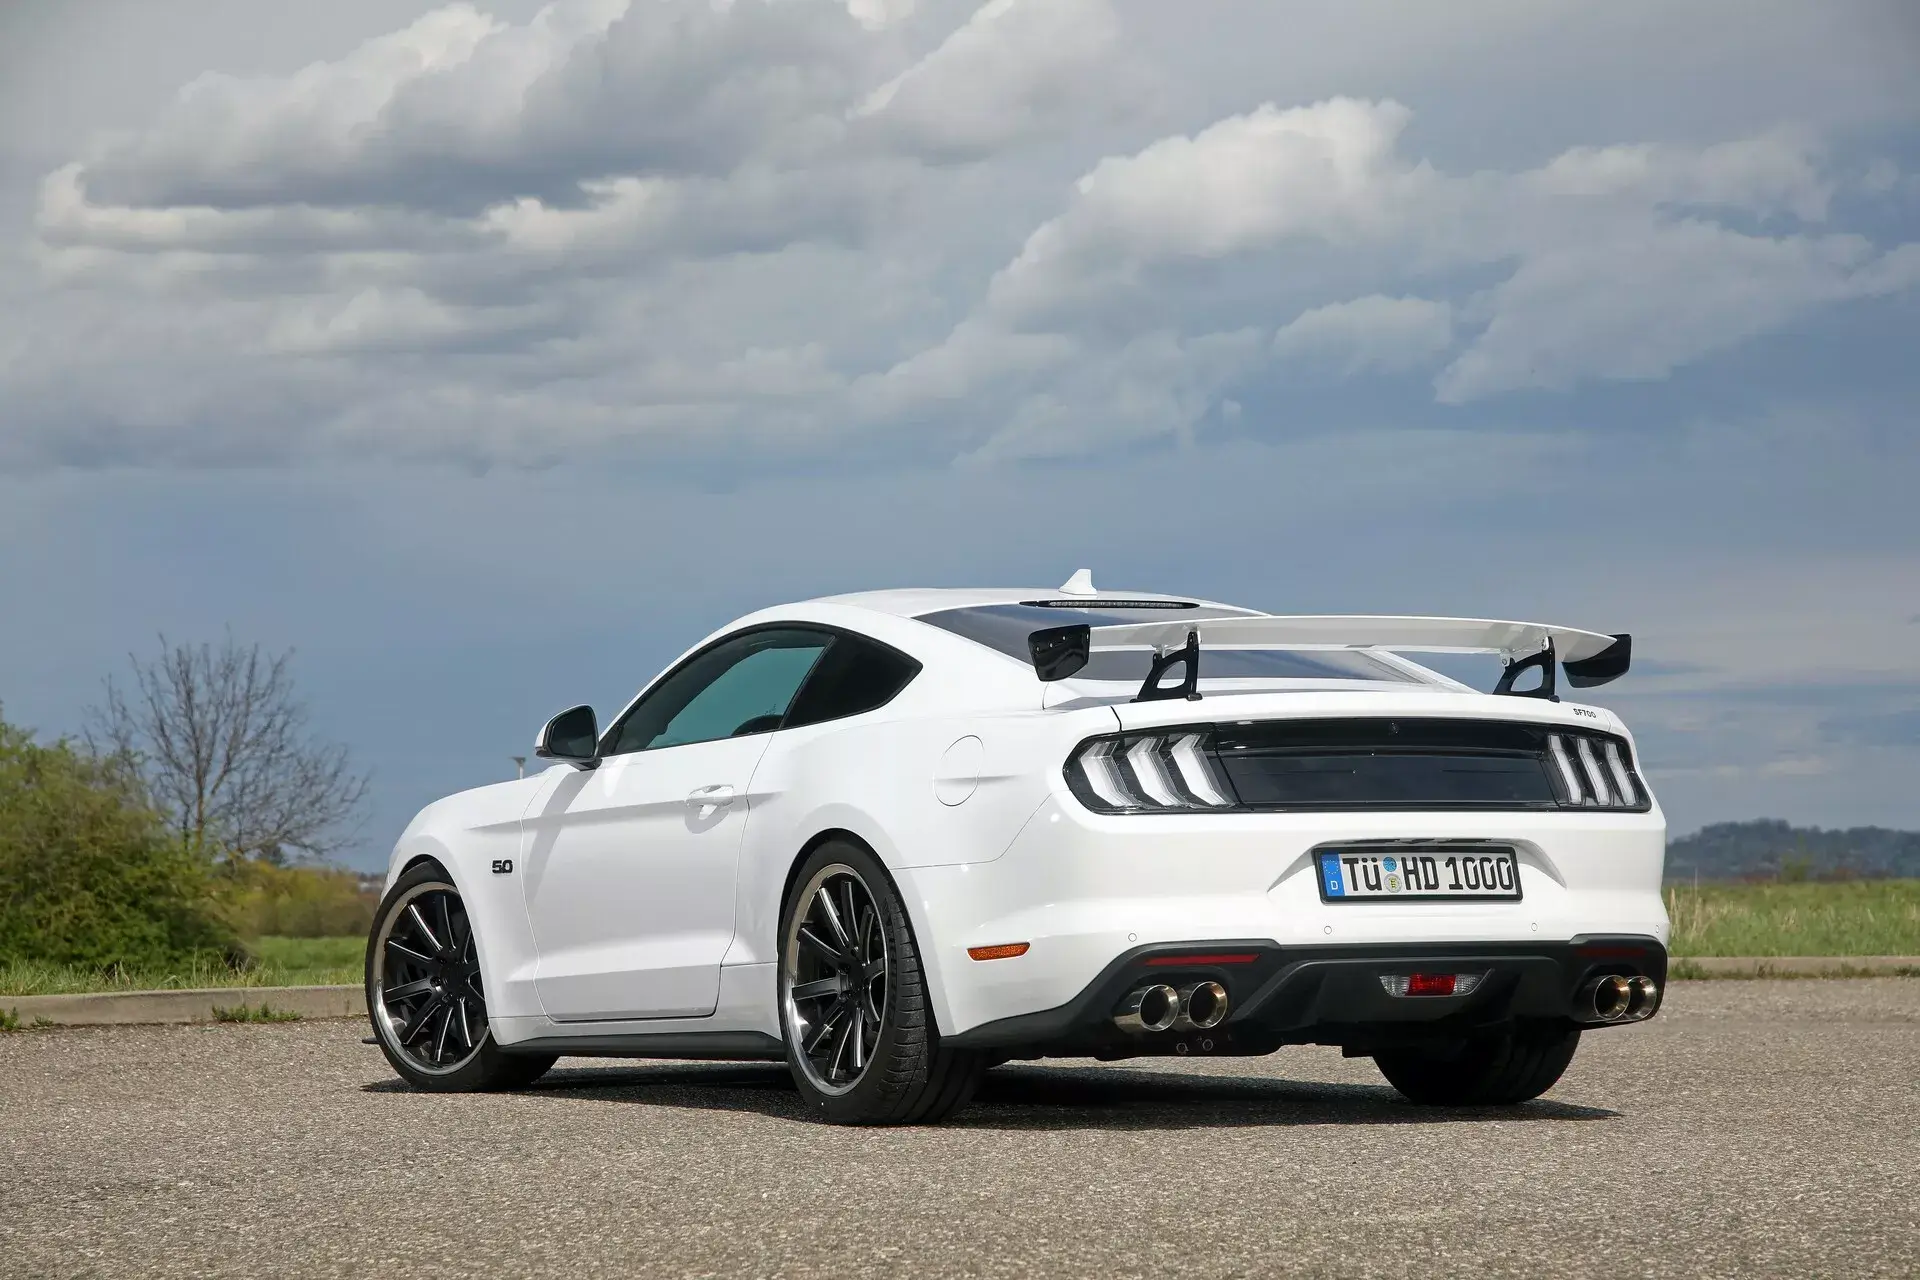 The Germans turned the Ford Mustang coupe into a competitor to the “charged” Shelby GT500